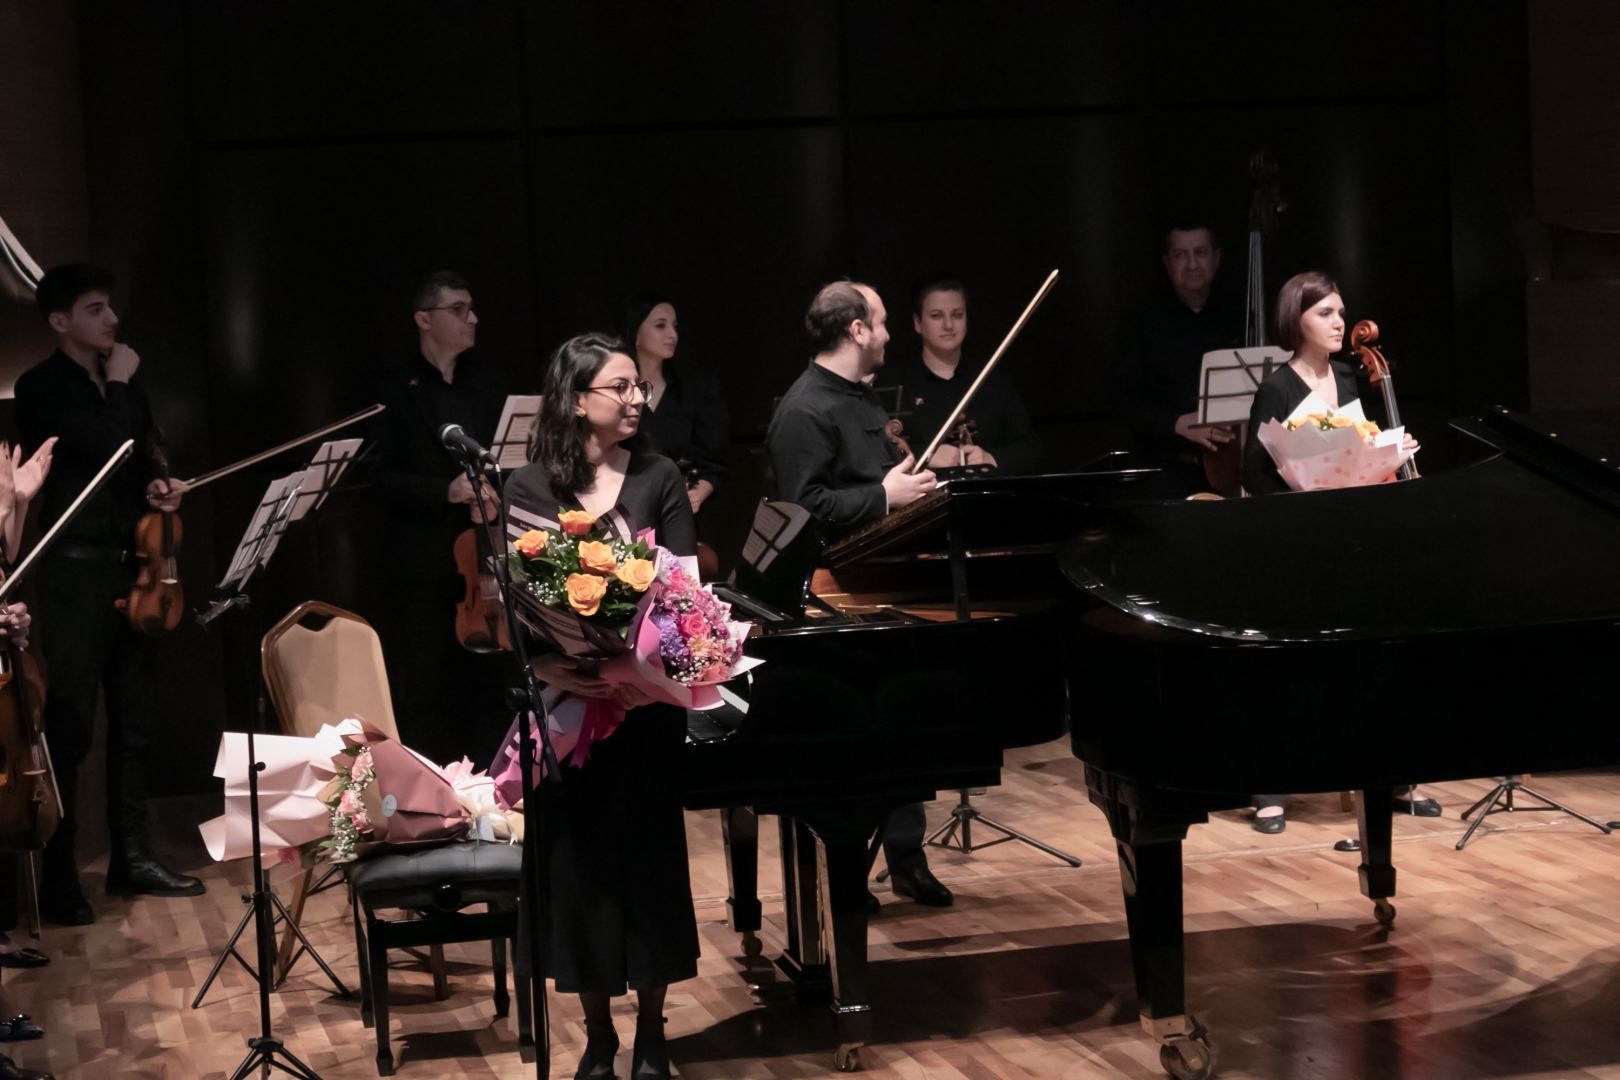 Cadenza Contemporary Orchestra thrills audience at Mugham Center [PHOTO/VIDEO]